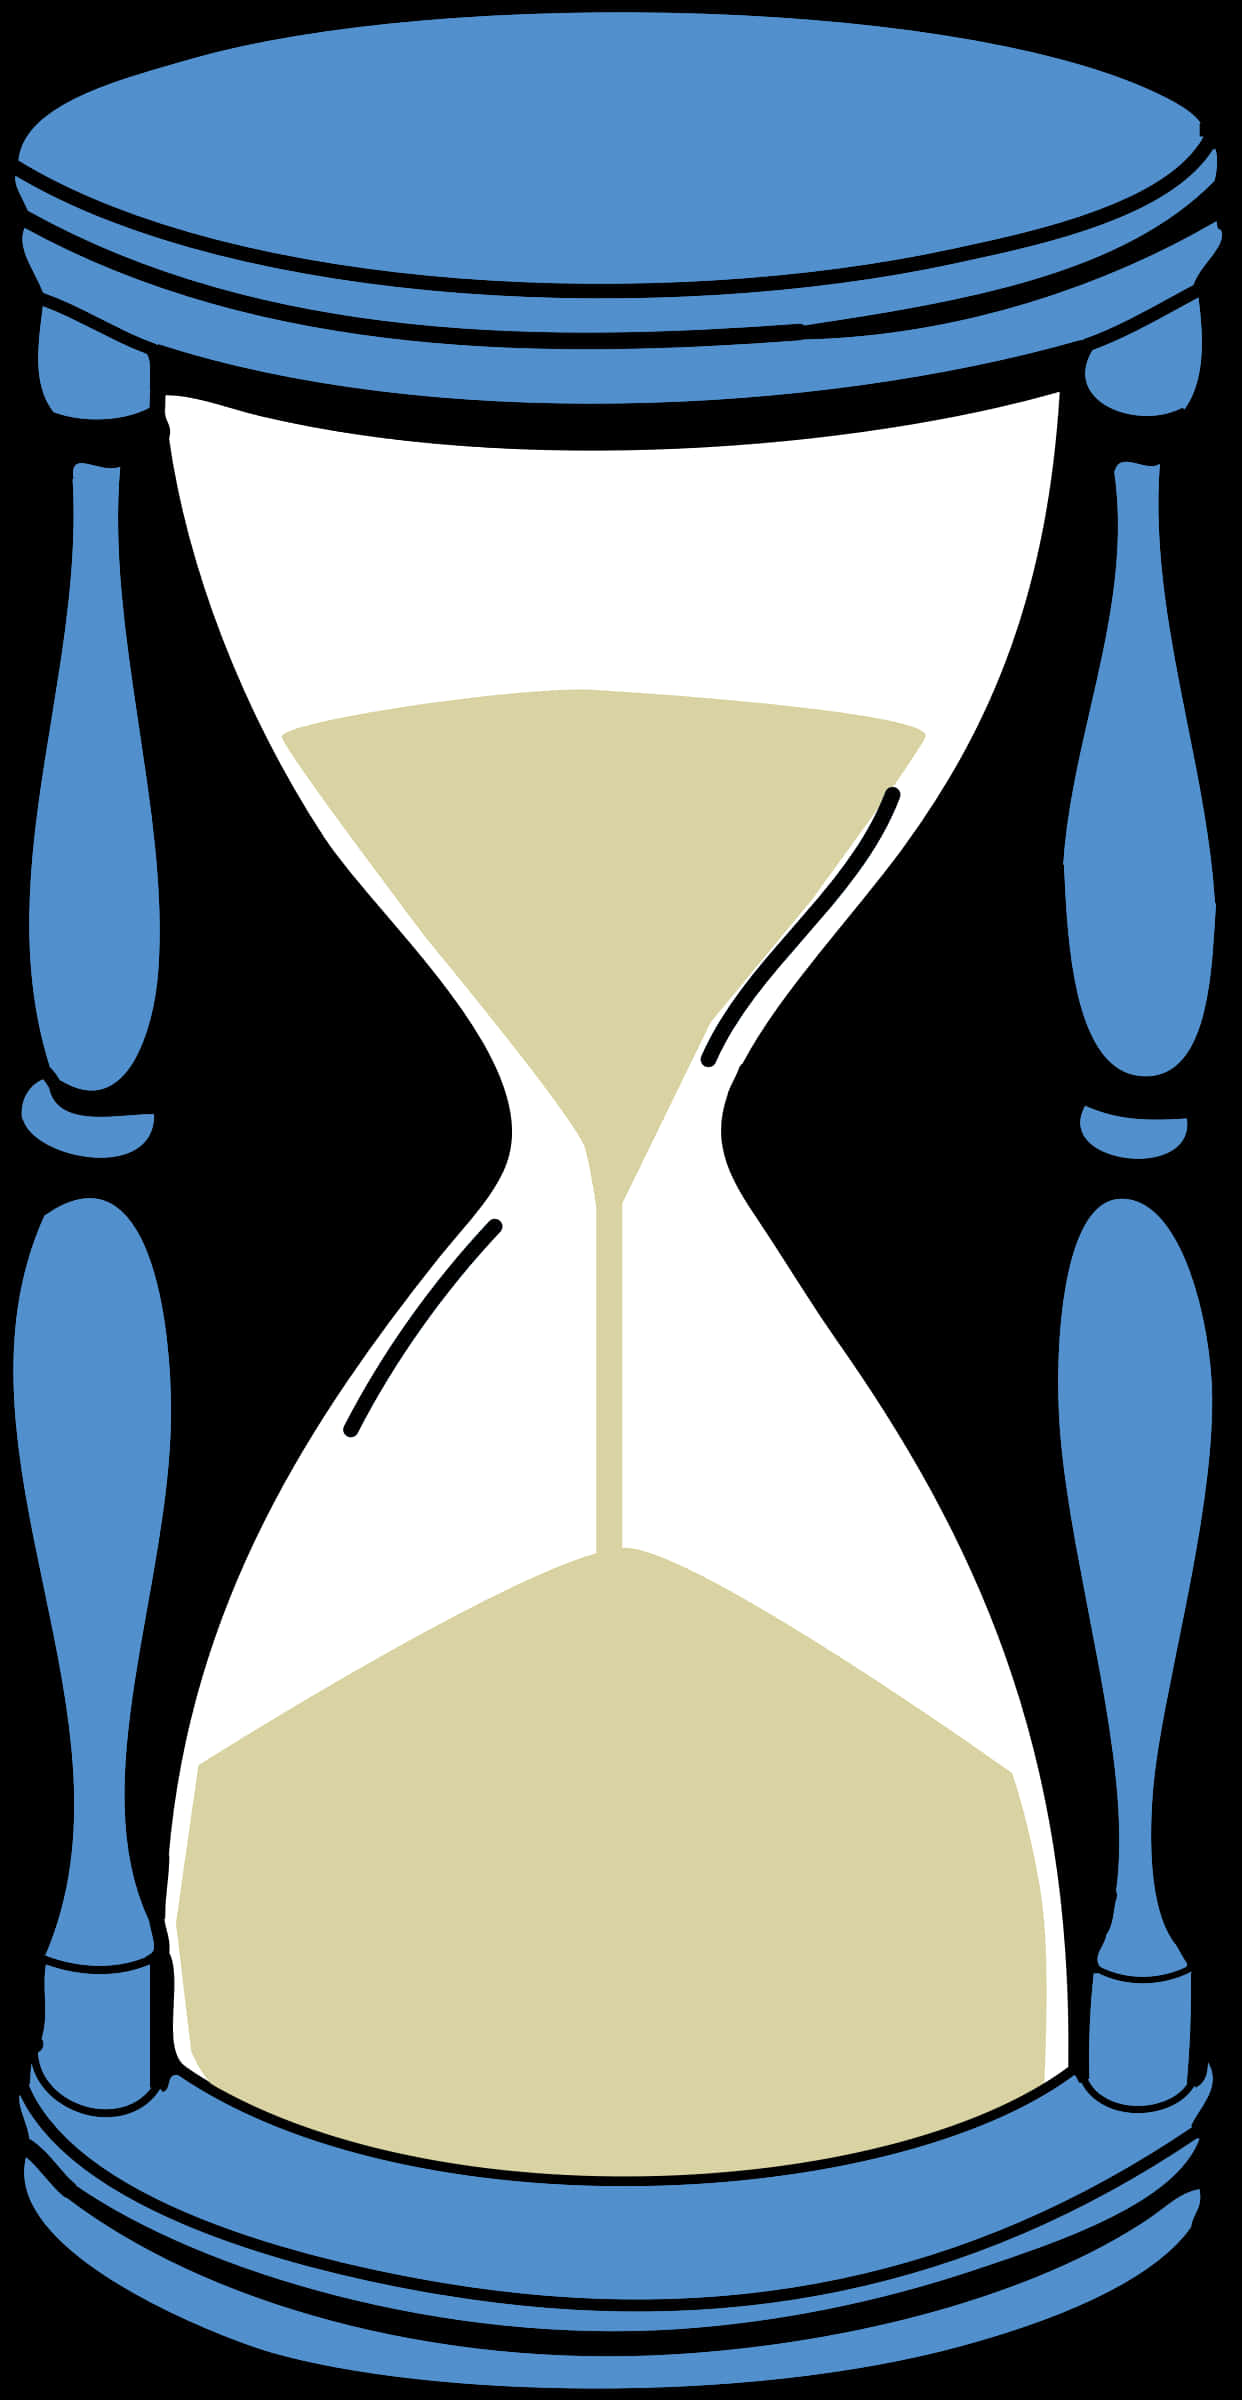 A Sand Glass With A Blue And Black Background